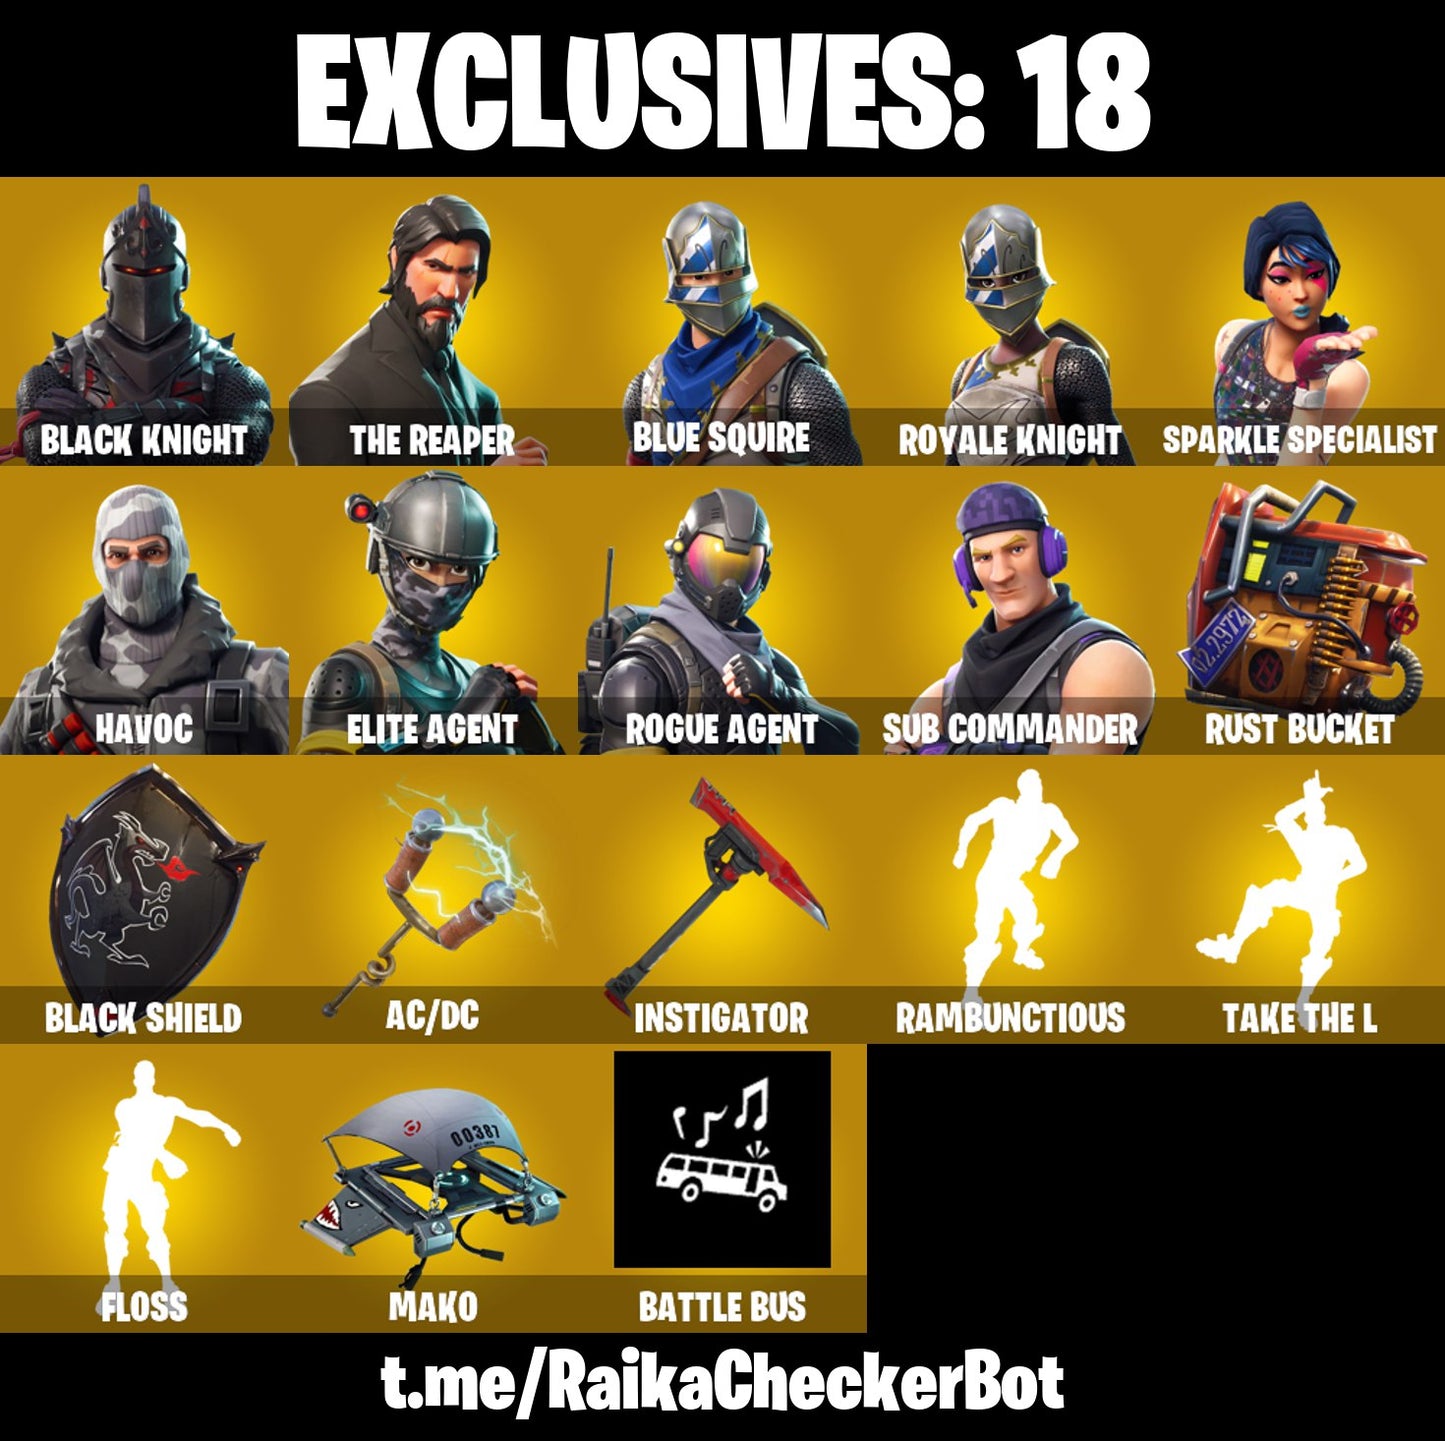 40 skins | Black Knight | The Reaper | Blue Squire | Royale Knight | Sparkle Specialist | Havoc | Elite Agent | take the l | floss | Mako |